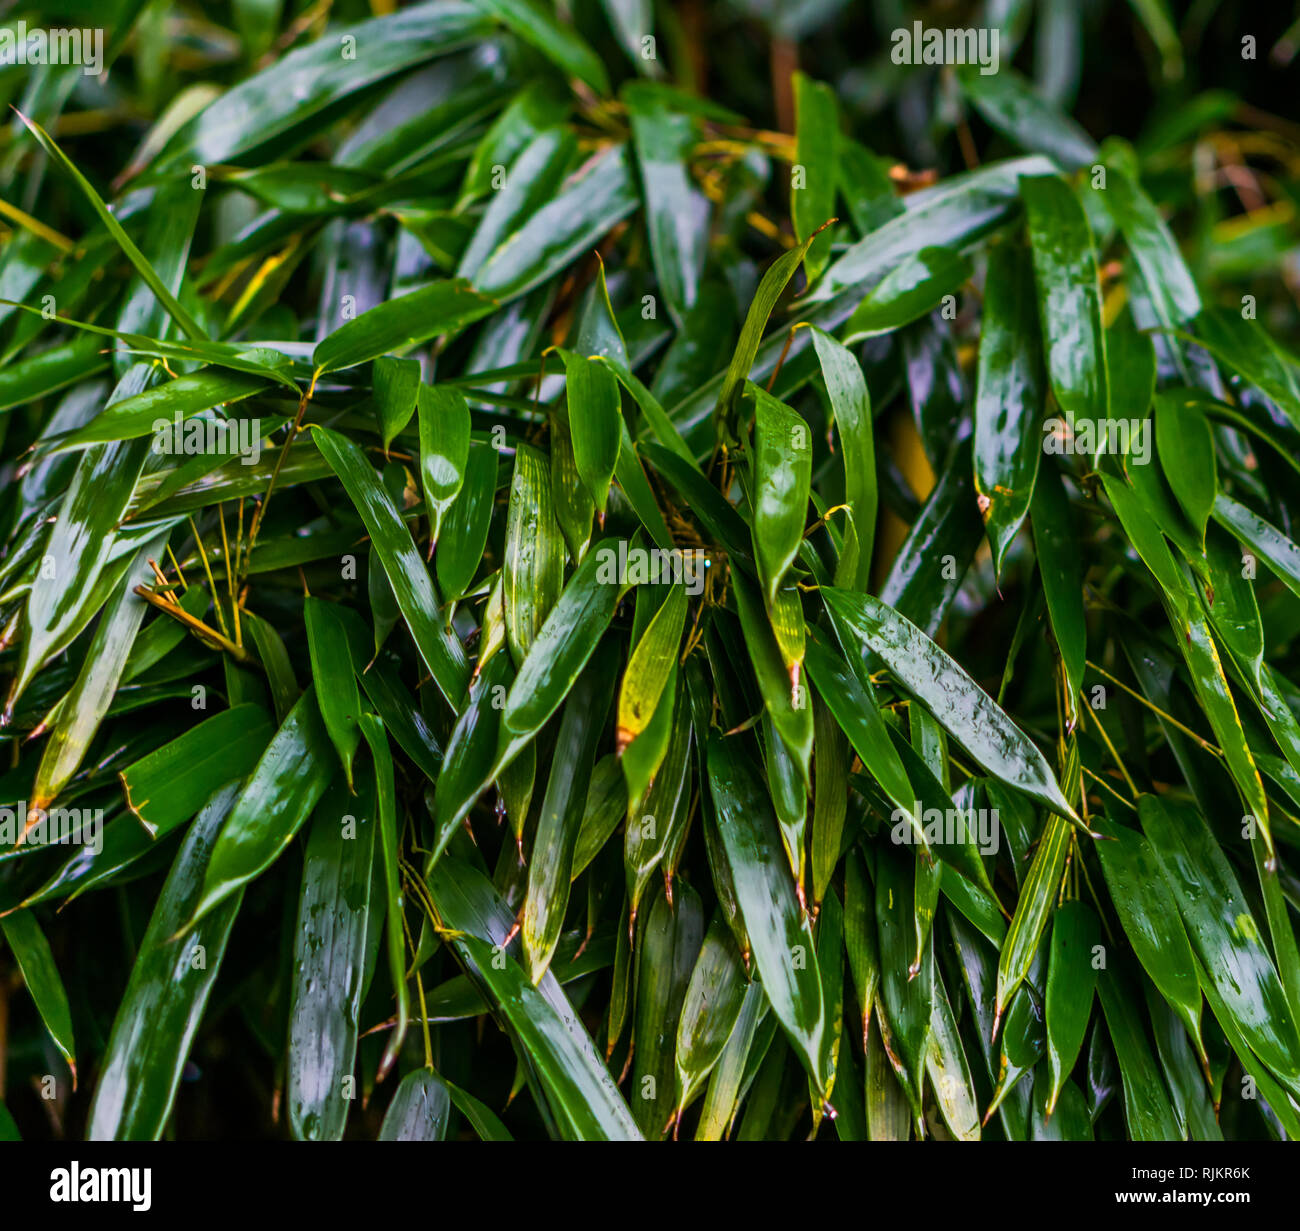 macro closeup of wet green bamboo leaves, japanese garden, natural background pattern Stock Photo